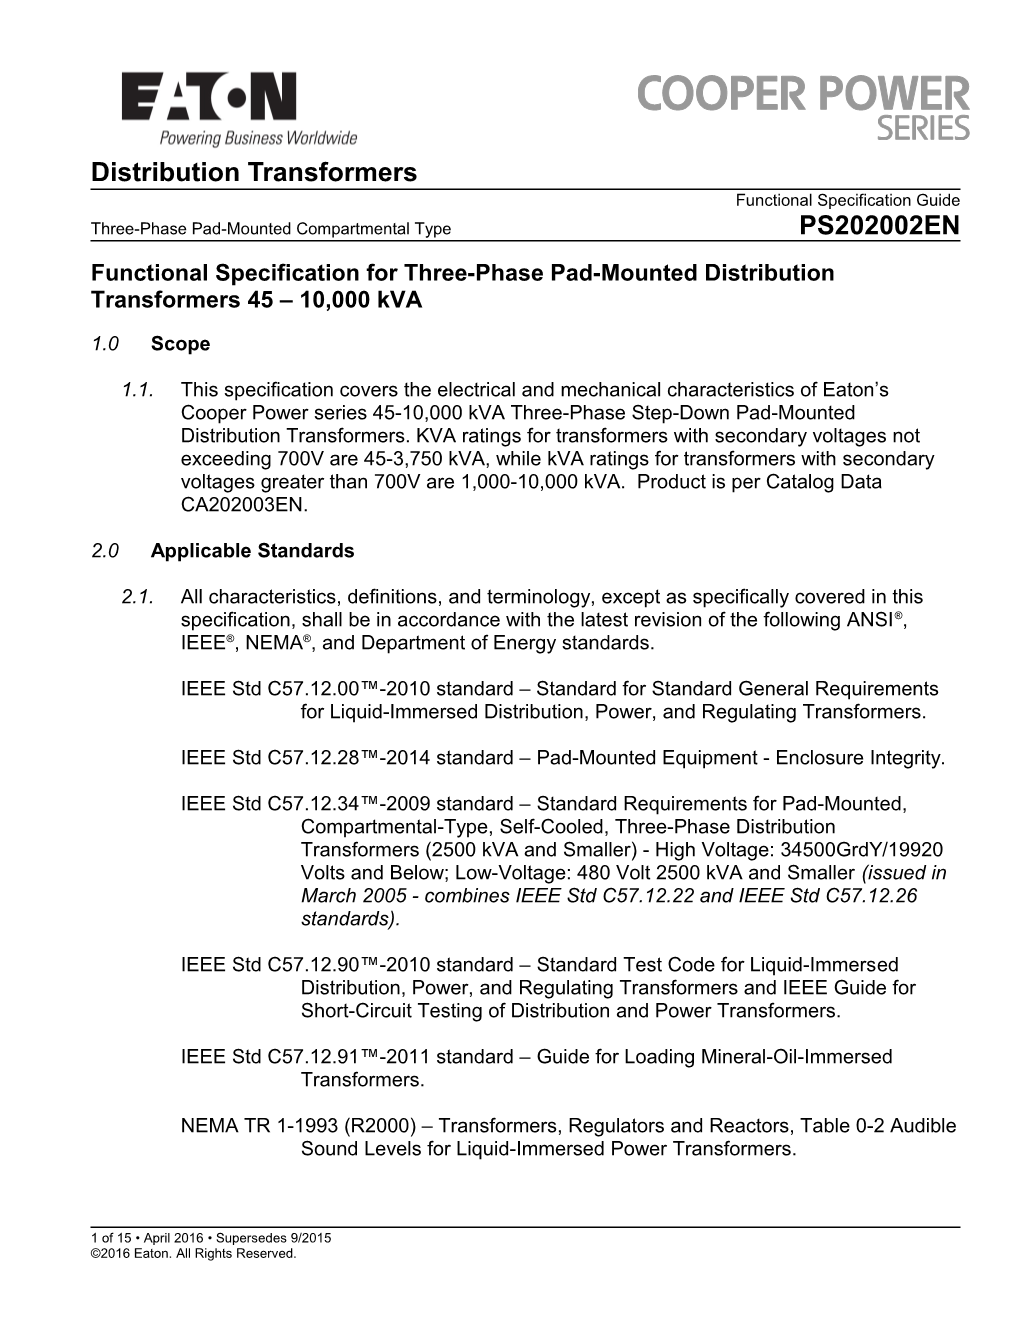 Functional Specification for Three-Phase Pad-Mounted Distribution Transformers 45 10,000 Kva